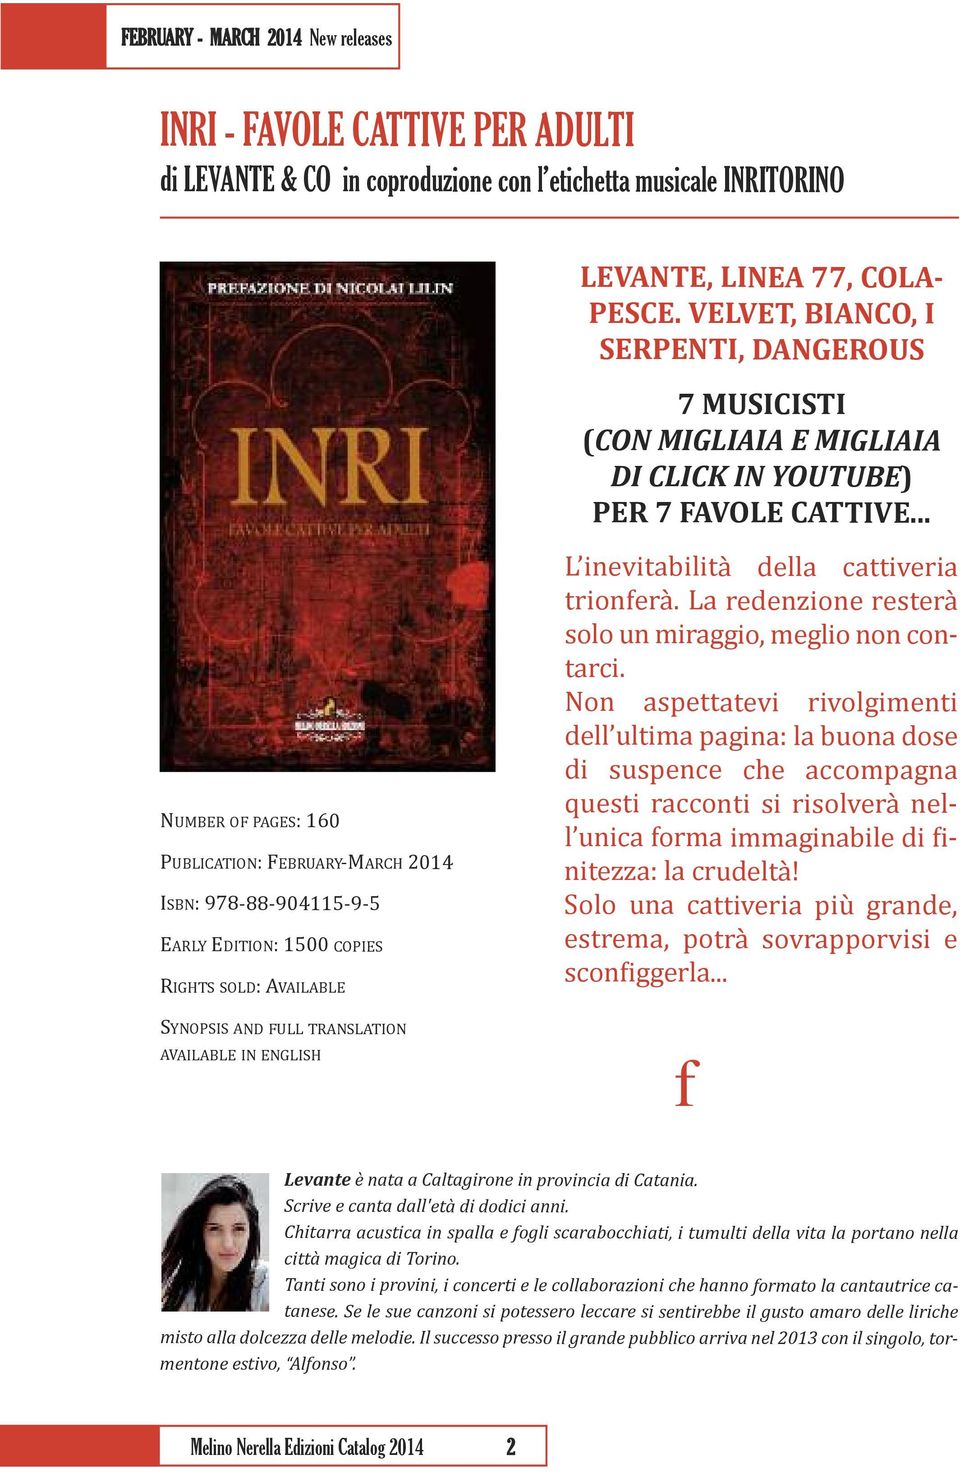 .. NUMBEr of PagES: 160 PUBLiCaTioN: FEBrUarY-MarCH 2014 isbn: 978-88-904115-9-5 EarLY EDiTioN: 1500 CoPiES rights SoLD: available SYNoPSiS and FULL TraNSLaTioN available in ENgLiSH L inevitabilità